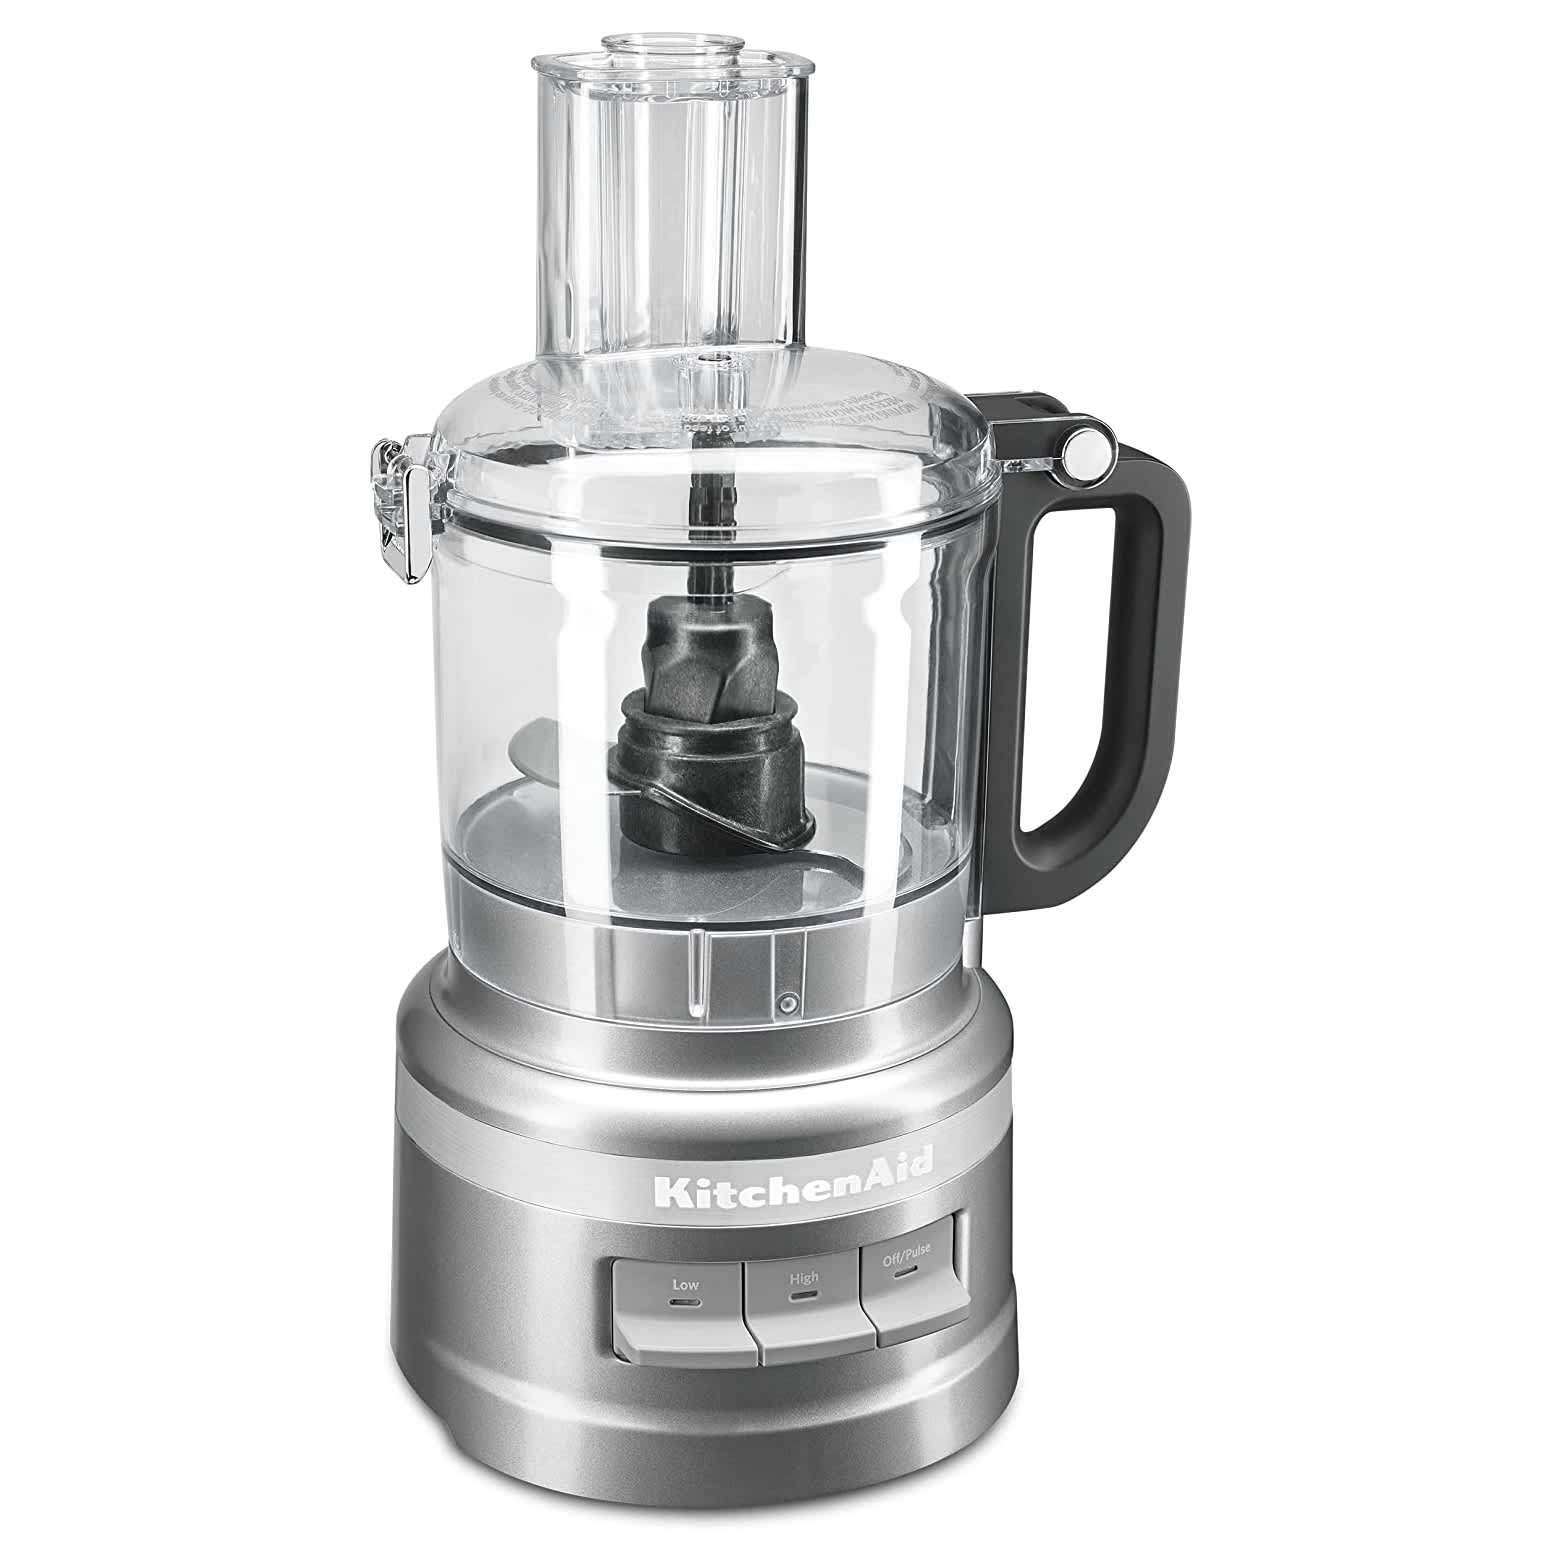 https://cdn.apartmenttherapy.info/image/upload/v1689079075/gen-workflow/product-database/kitchenaid-7-cup-food-processor-amazon.jpg